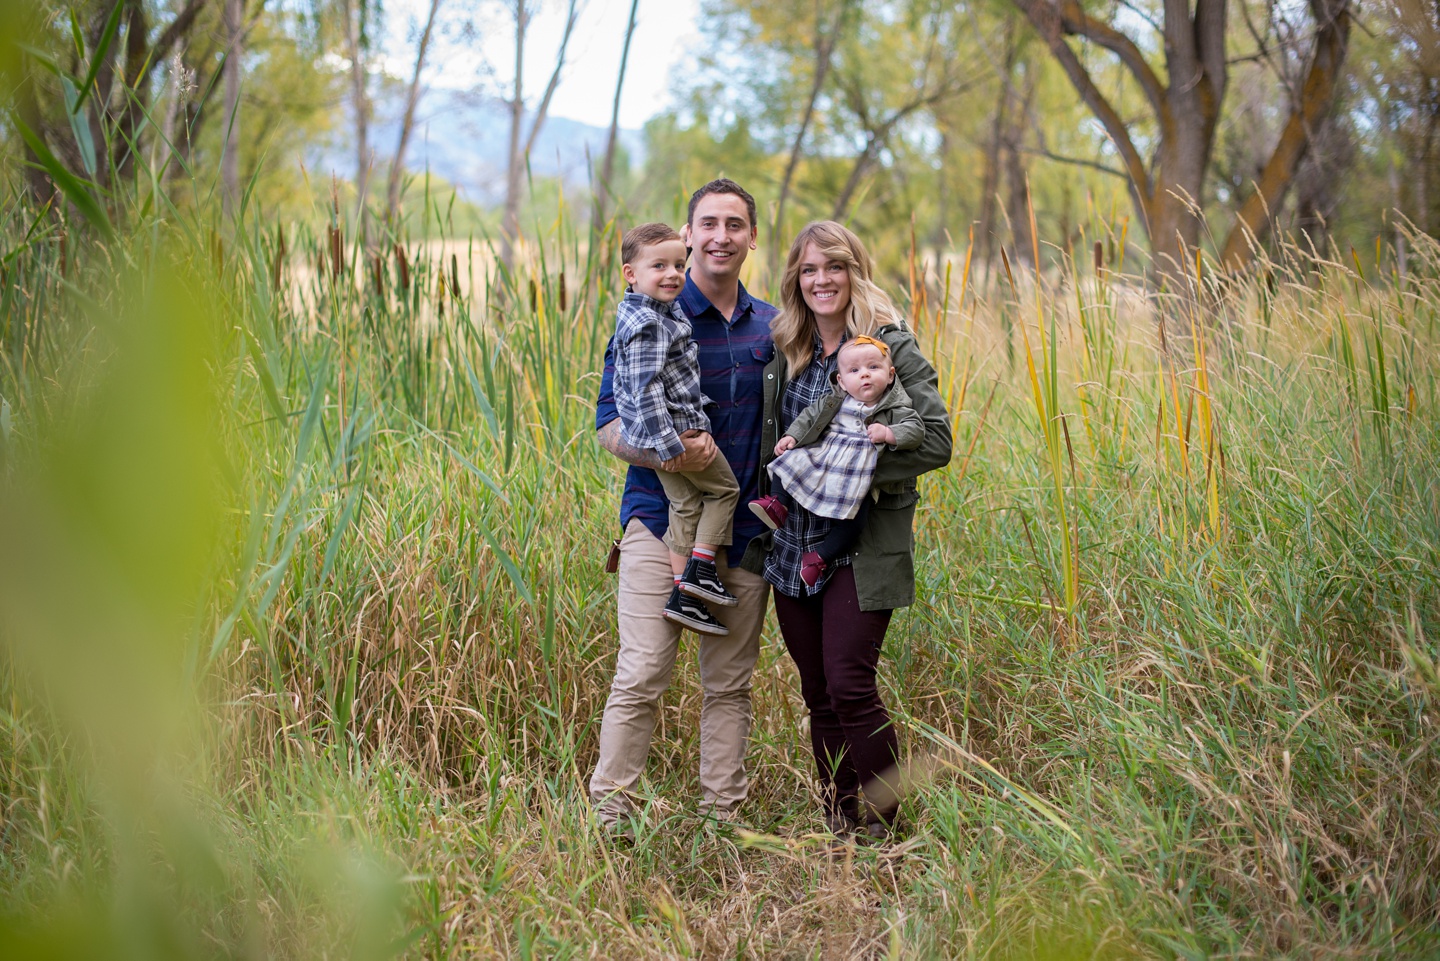 DAmico family photoshoot by The Aperture Company Photographers in Utah